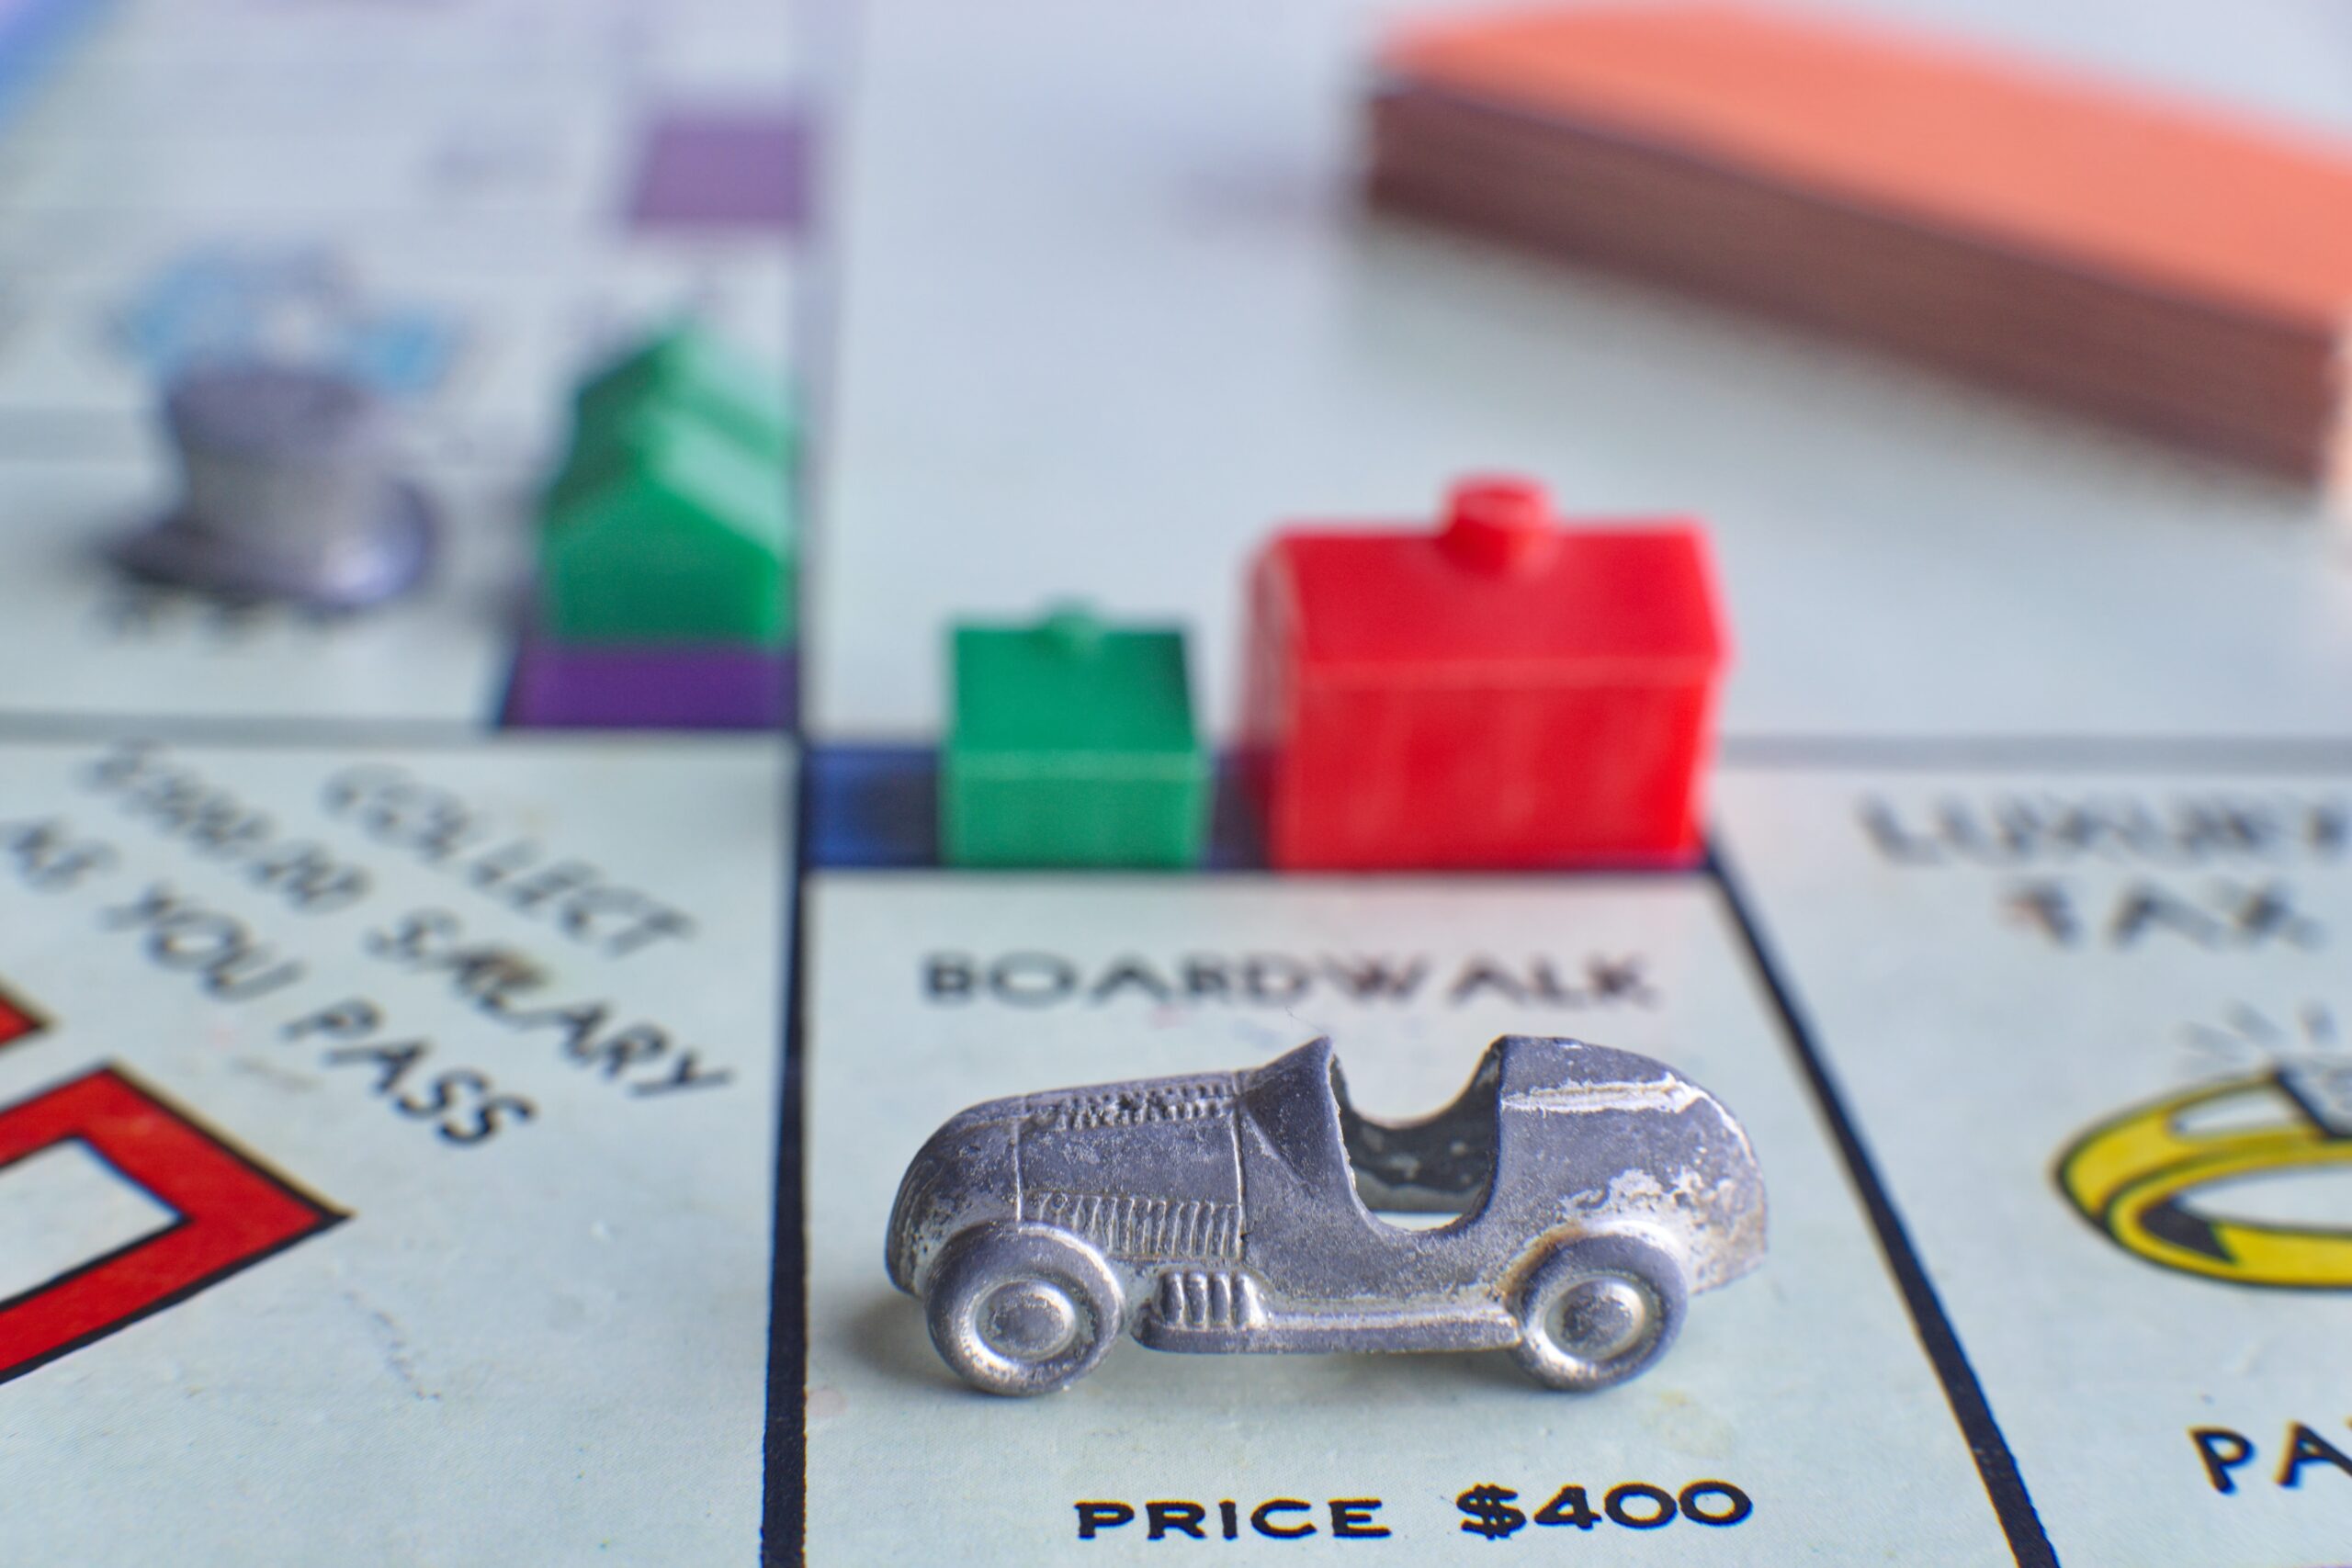 Monopoly game pieces used to illustrate the weekly Buy Sell Love Durham blog post about rising interest rates for mortgages.